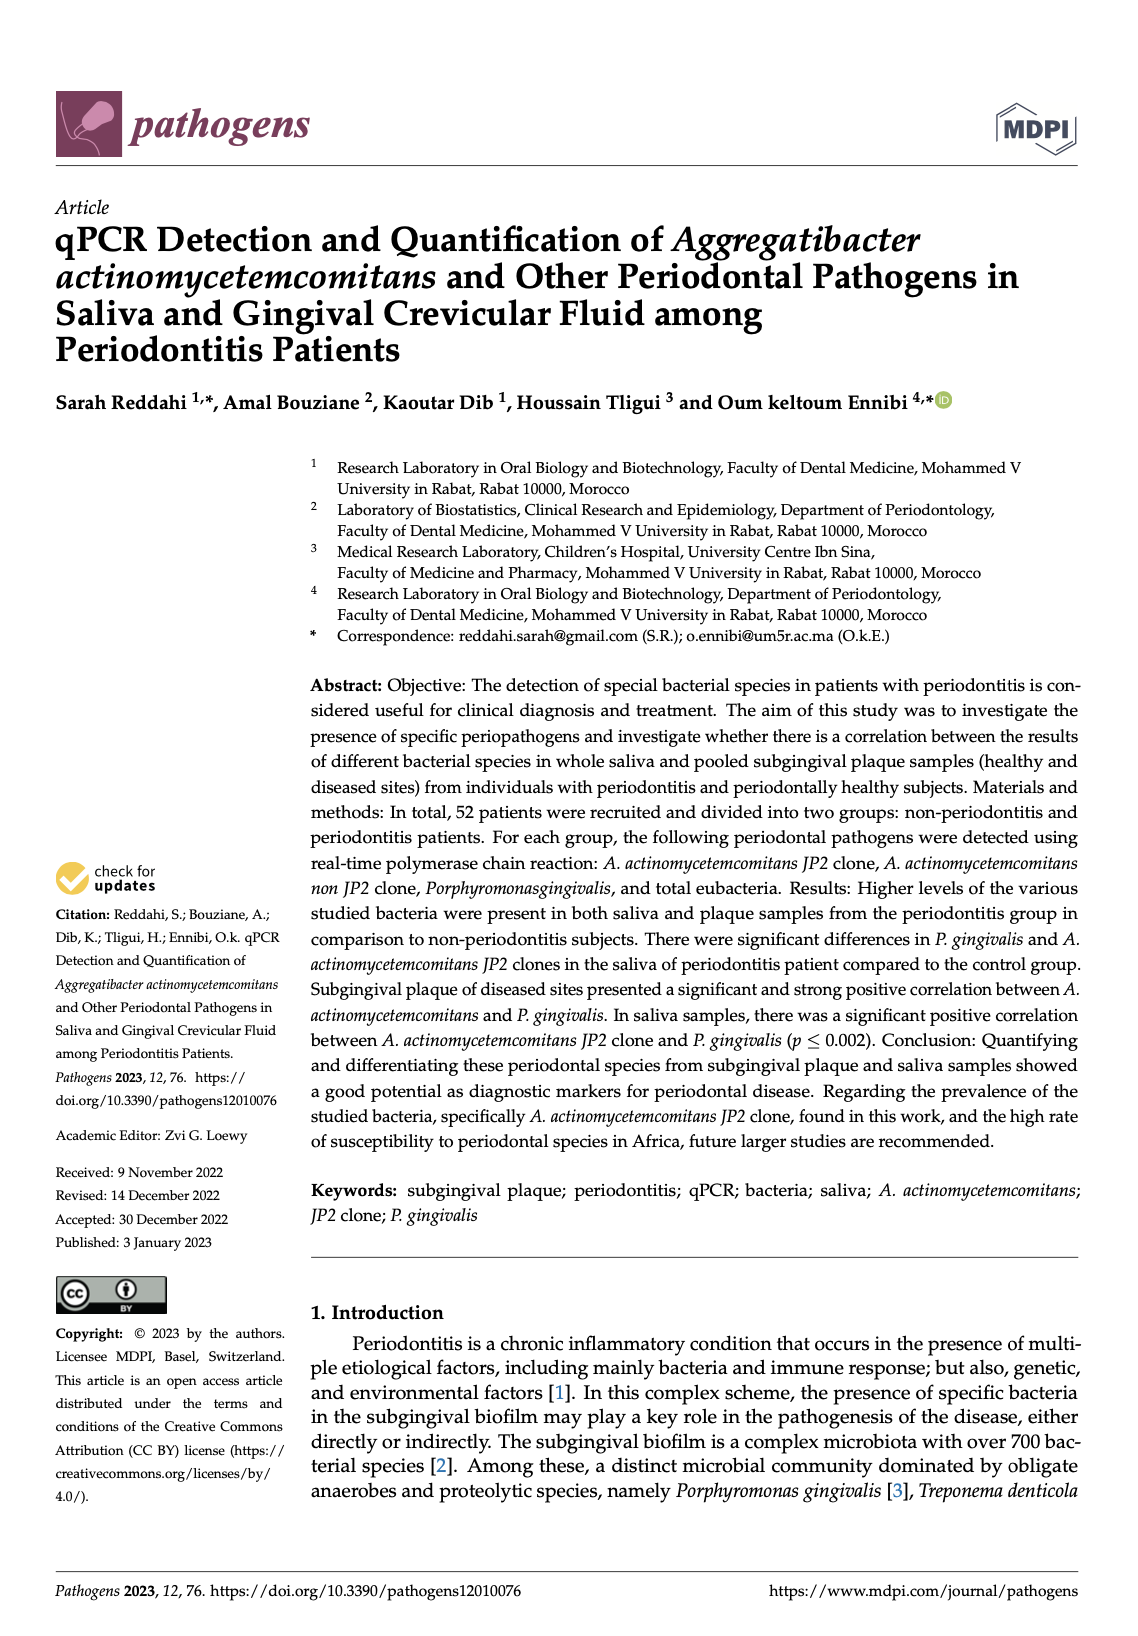 qPCR Detection and Quantification of Aggregatibacter actinomycetemcomitans and Other Periodontal Pathogens in Saliva and Gingival Crevicular Fluid among Periodontitis Patients